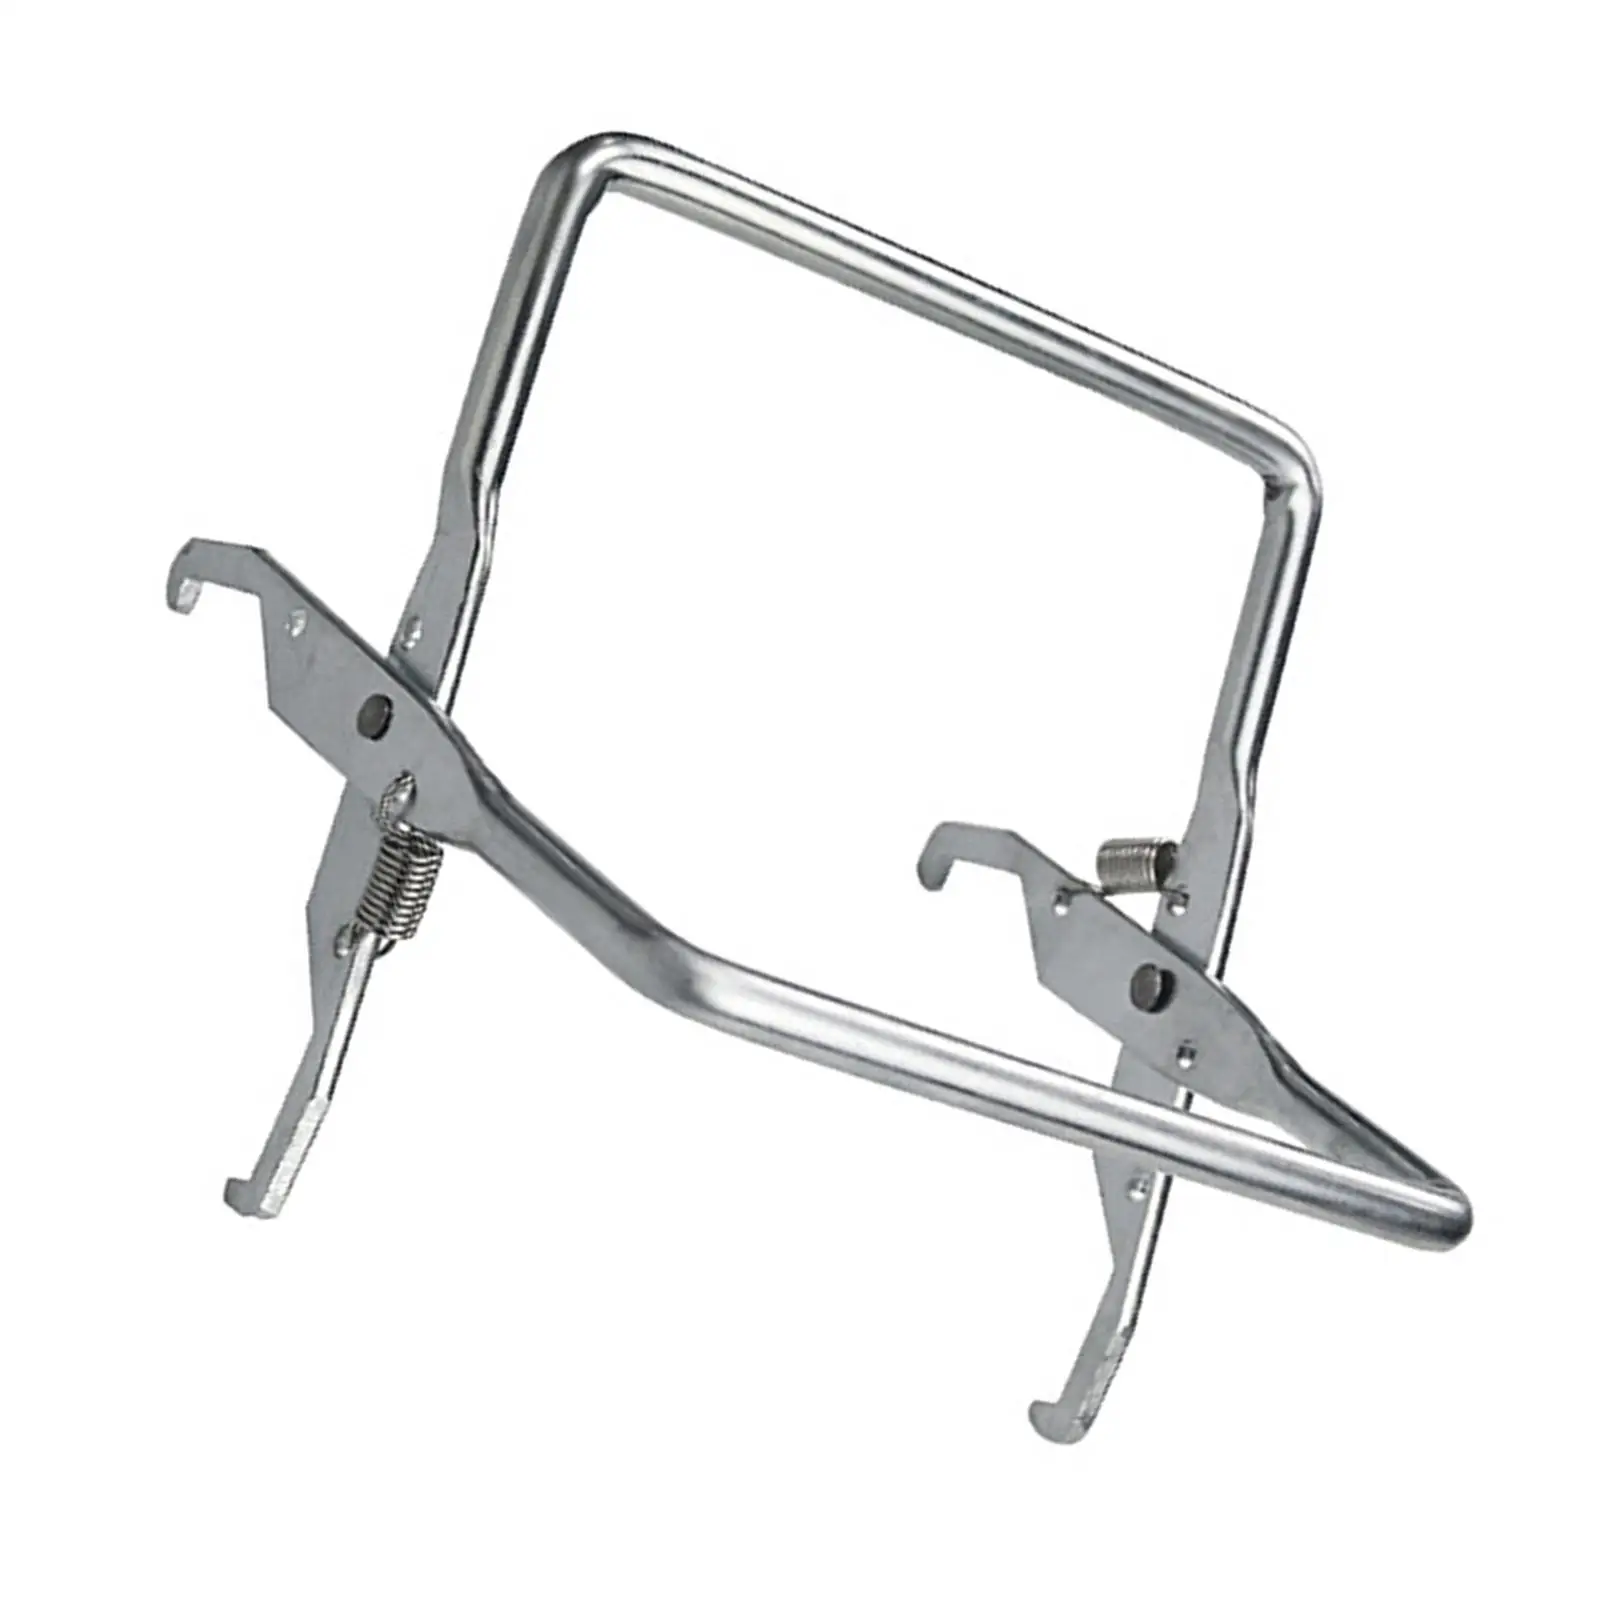 Bee Hive Frame Grip Holder Stainless Steel, for Beekeeper Accessories Durable High Performance